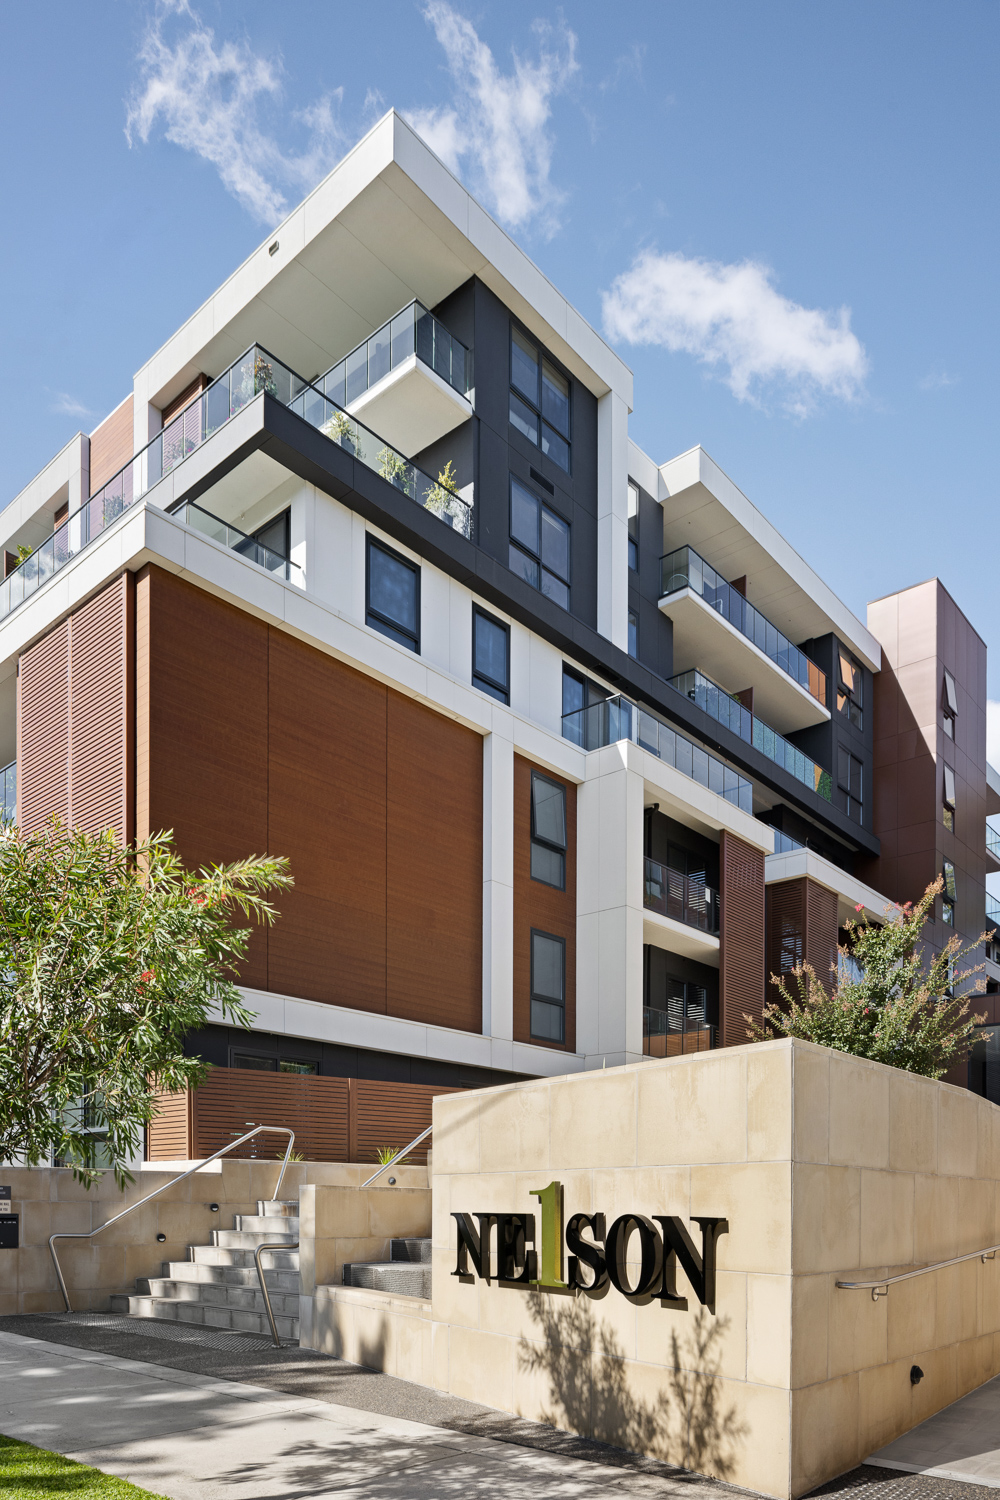 1-Nelson-Ringwood_Orion_Melourne_Apartment_Architecture.jpg